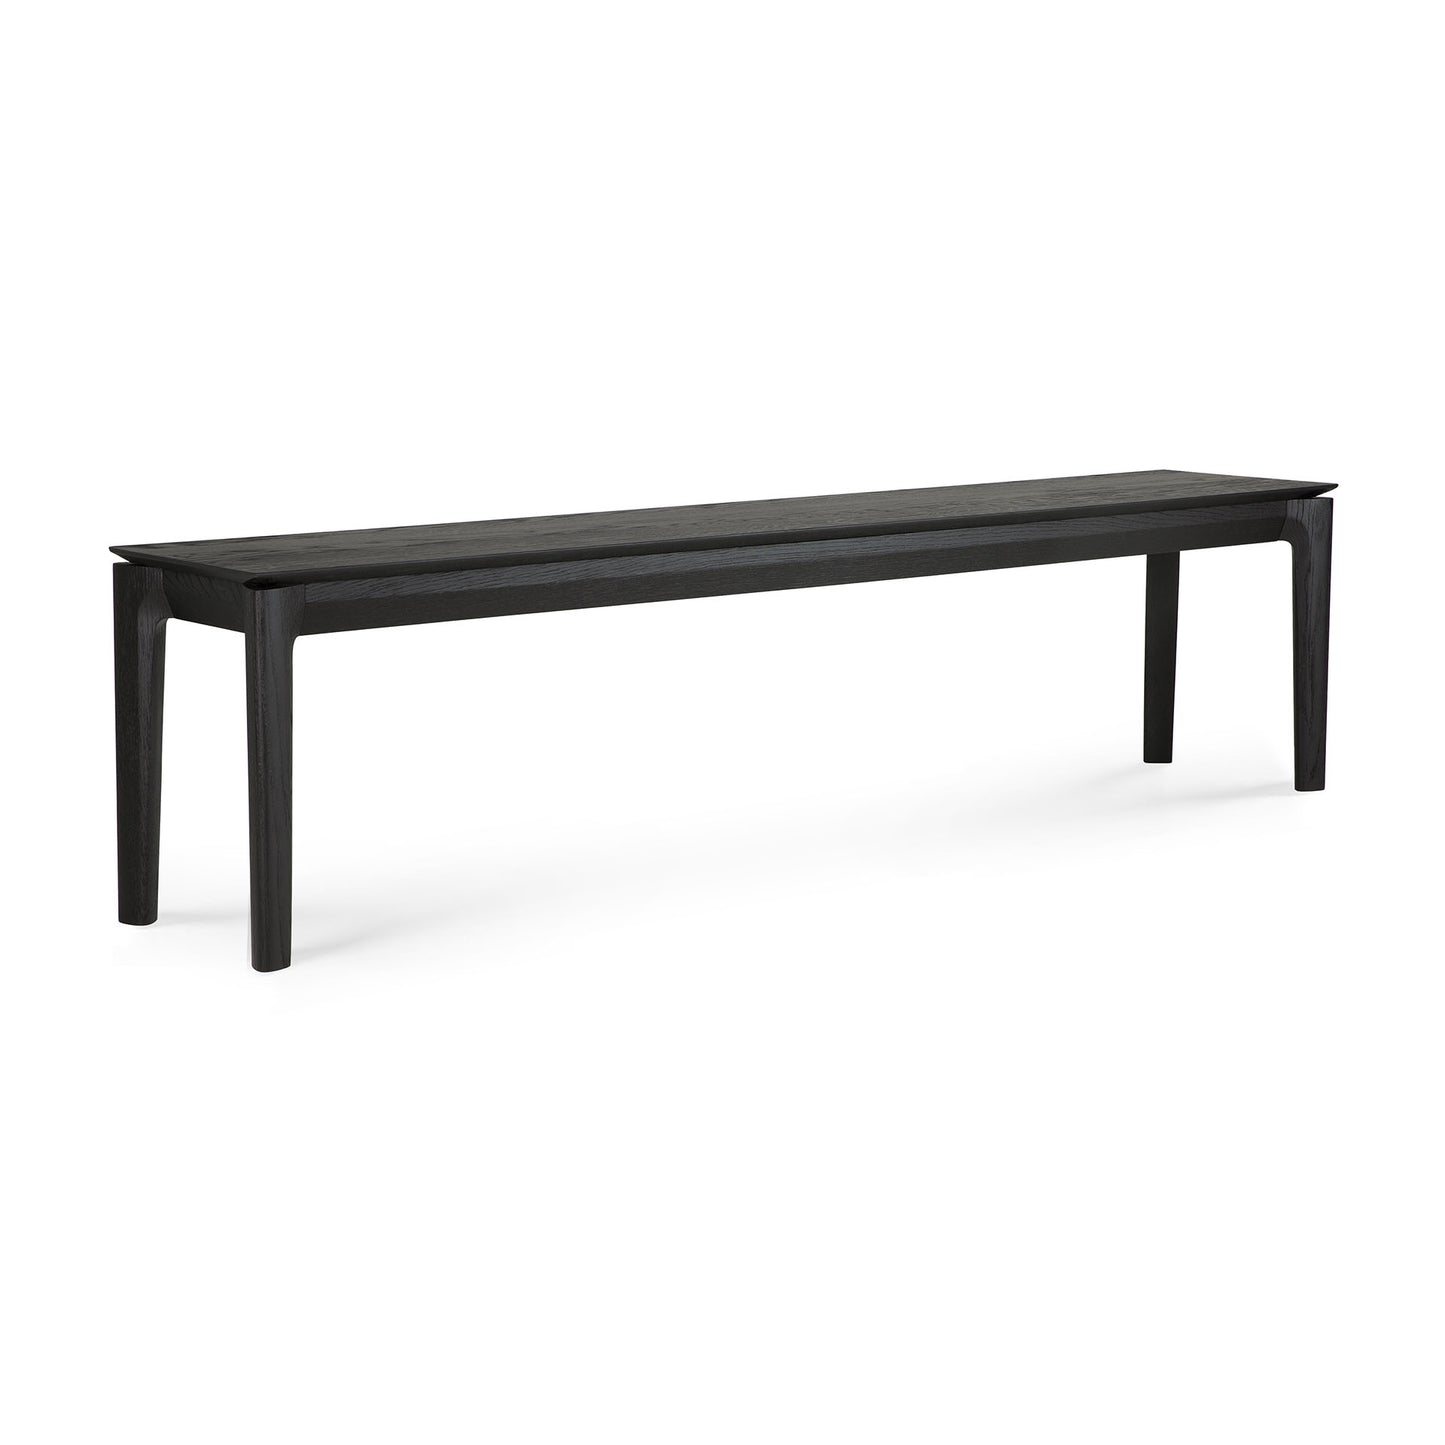 Ethnicraft Oak Bok Black Bench Seat is available from Make Your House A Home, Bendigo, Victoria, Australia